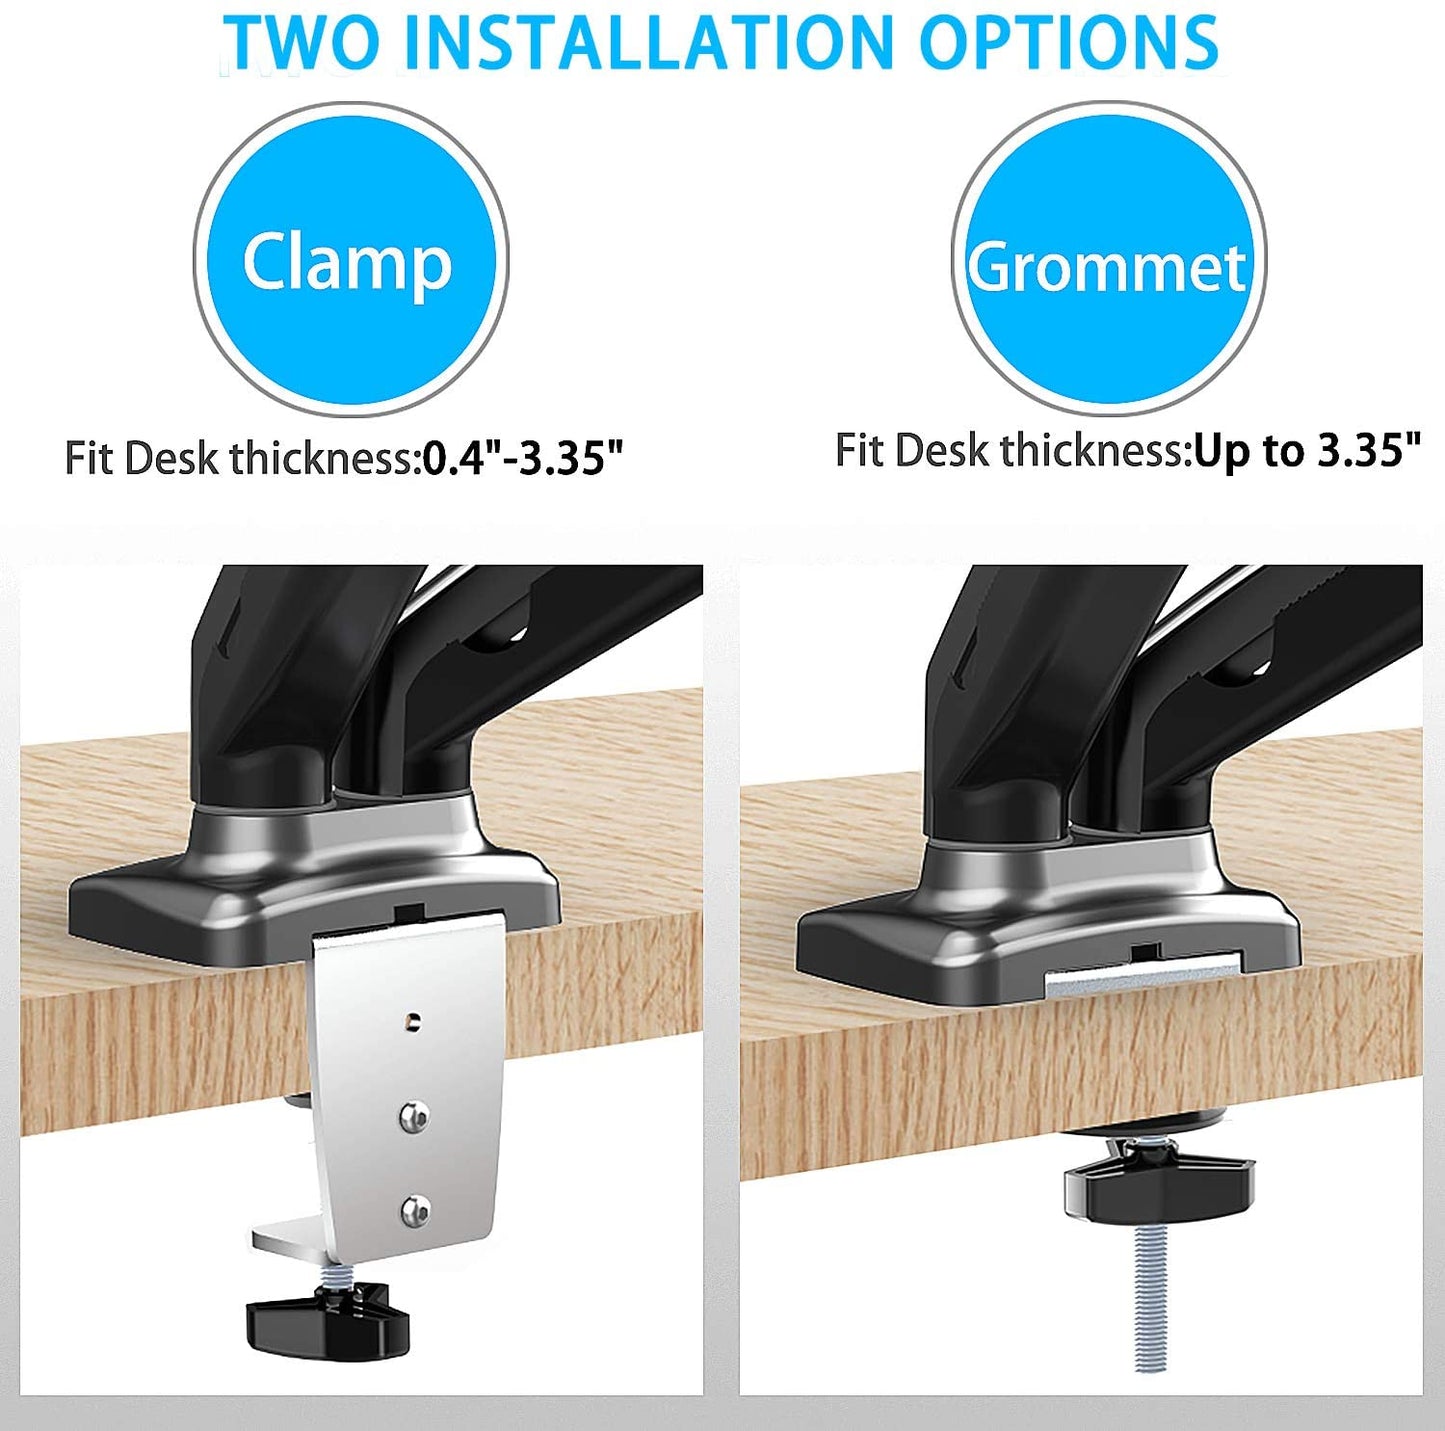 Dual Arms monitor arm mount for clamp or grommet installation